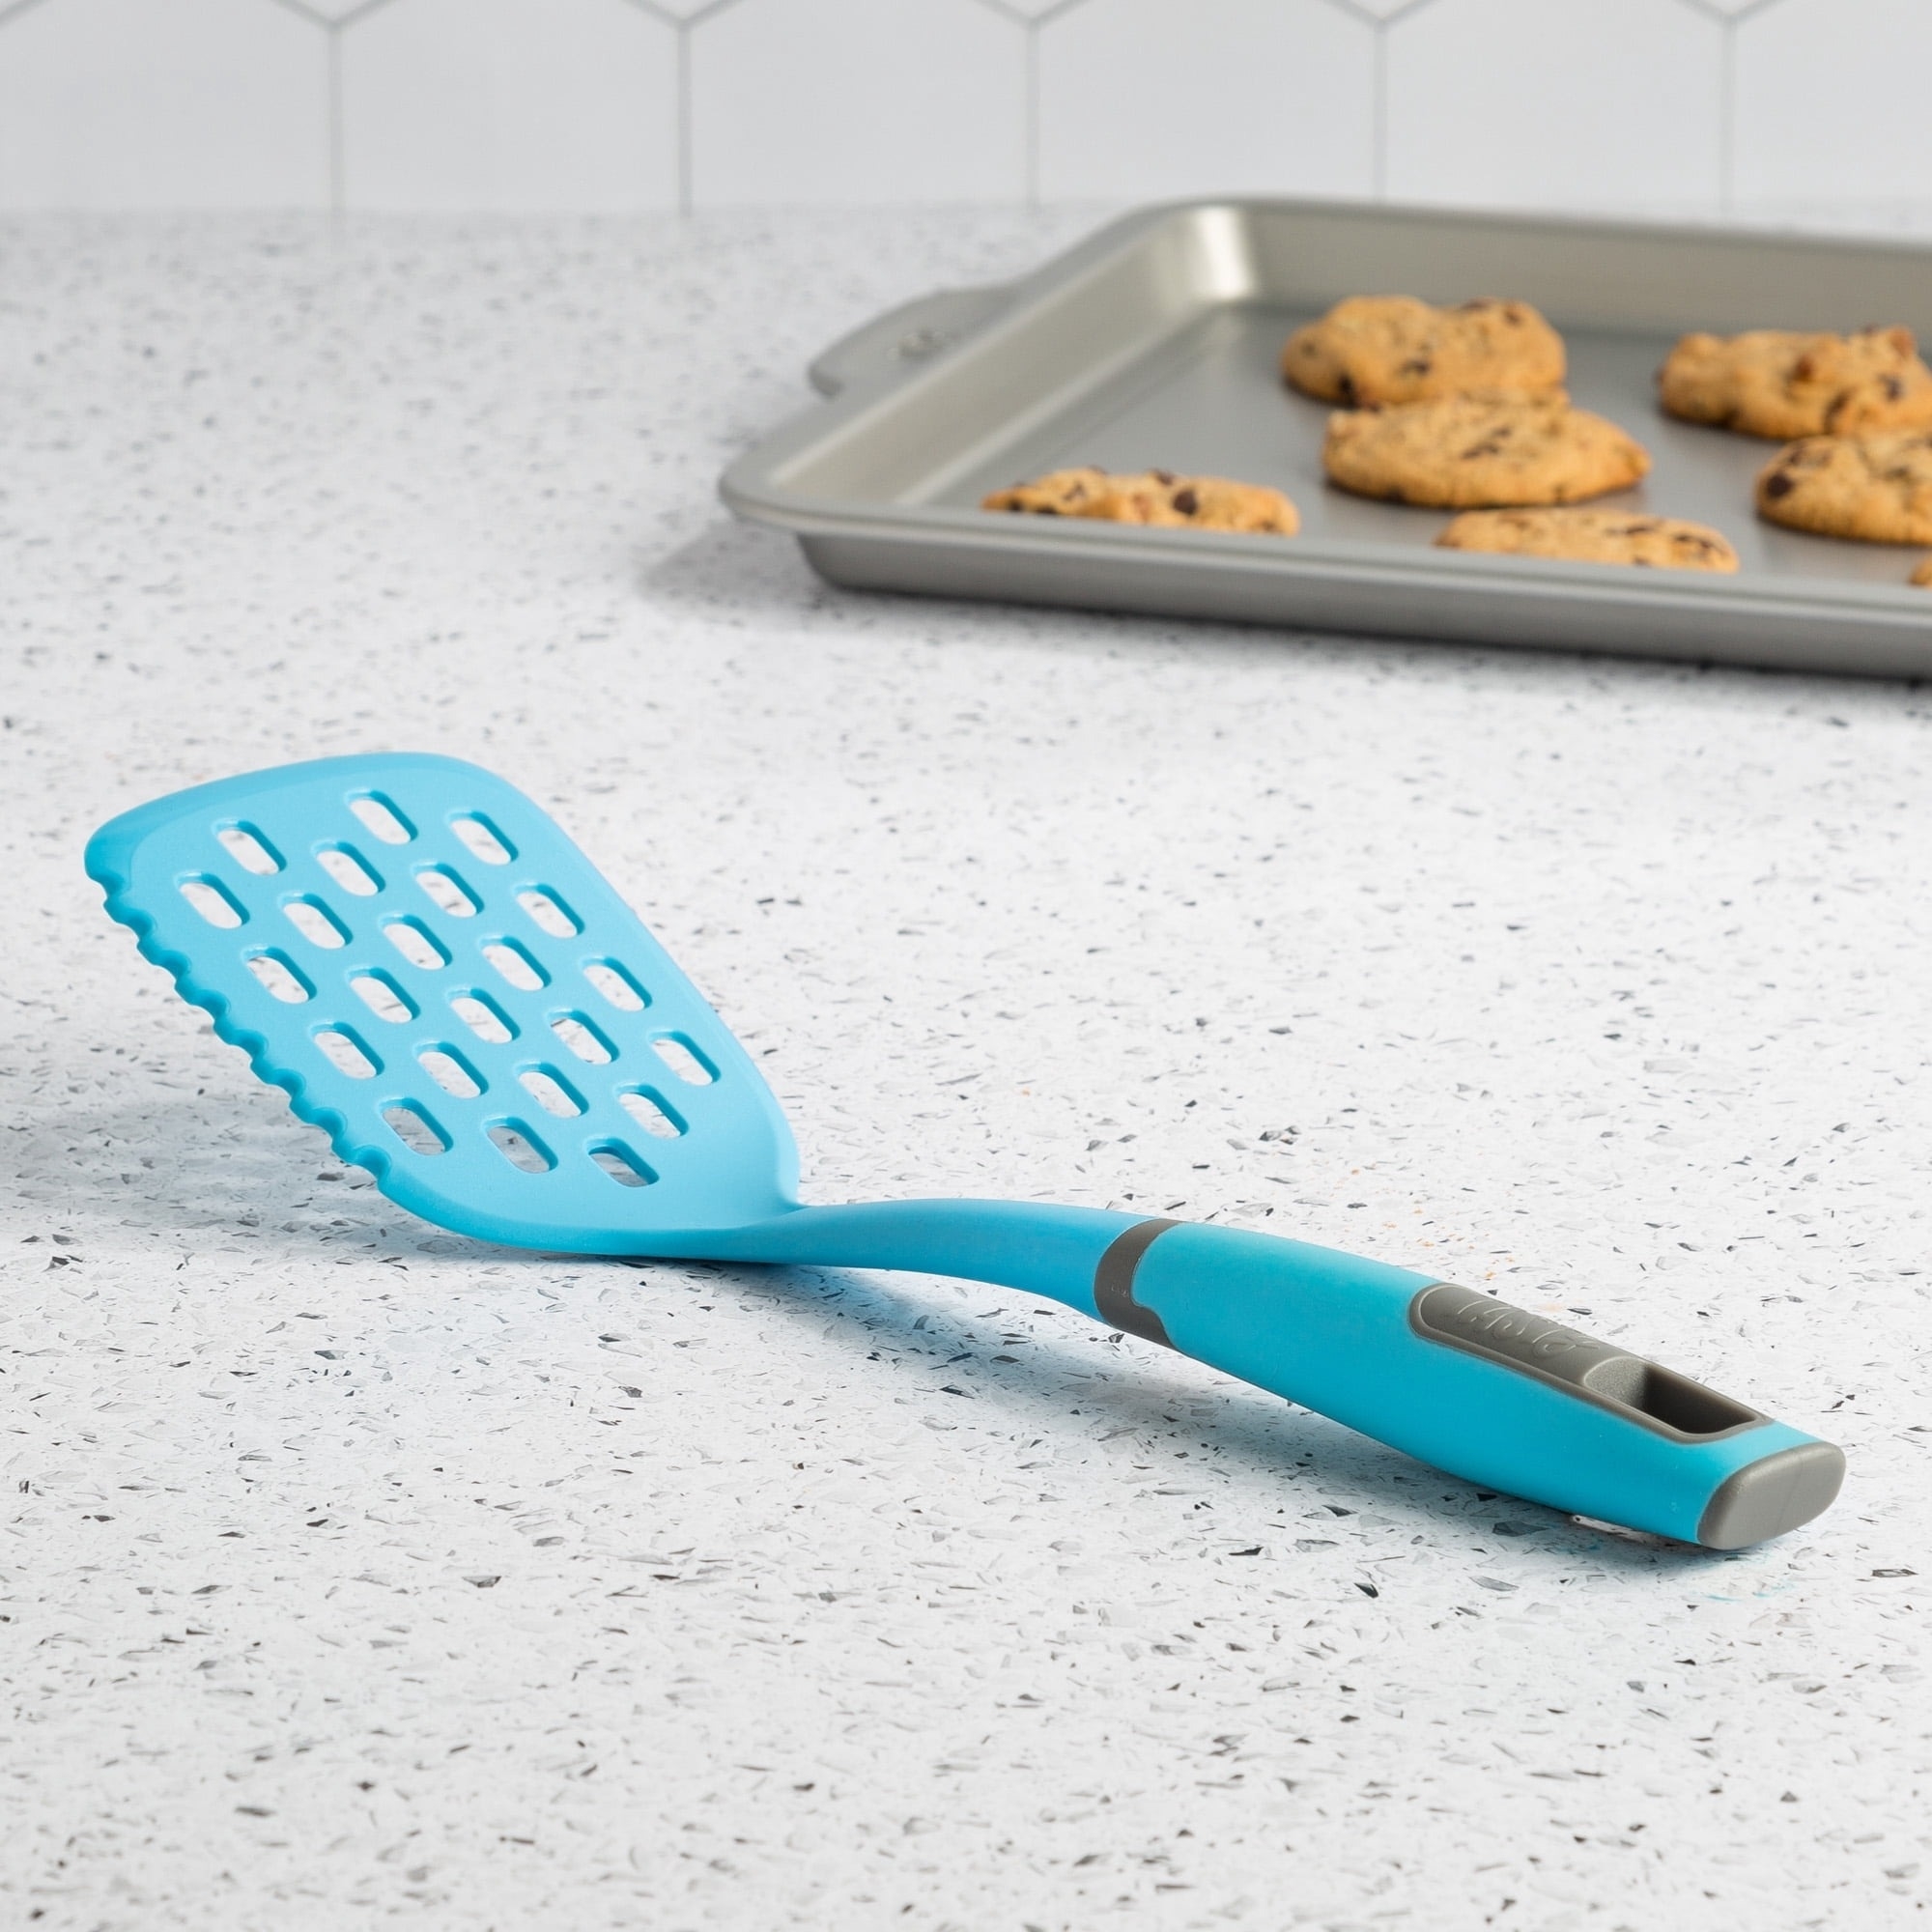 A blue slotted turner on a counter with cookies